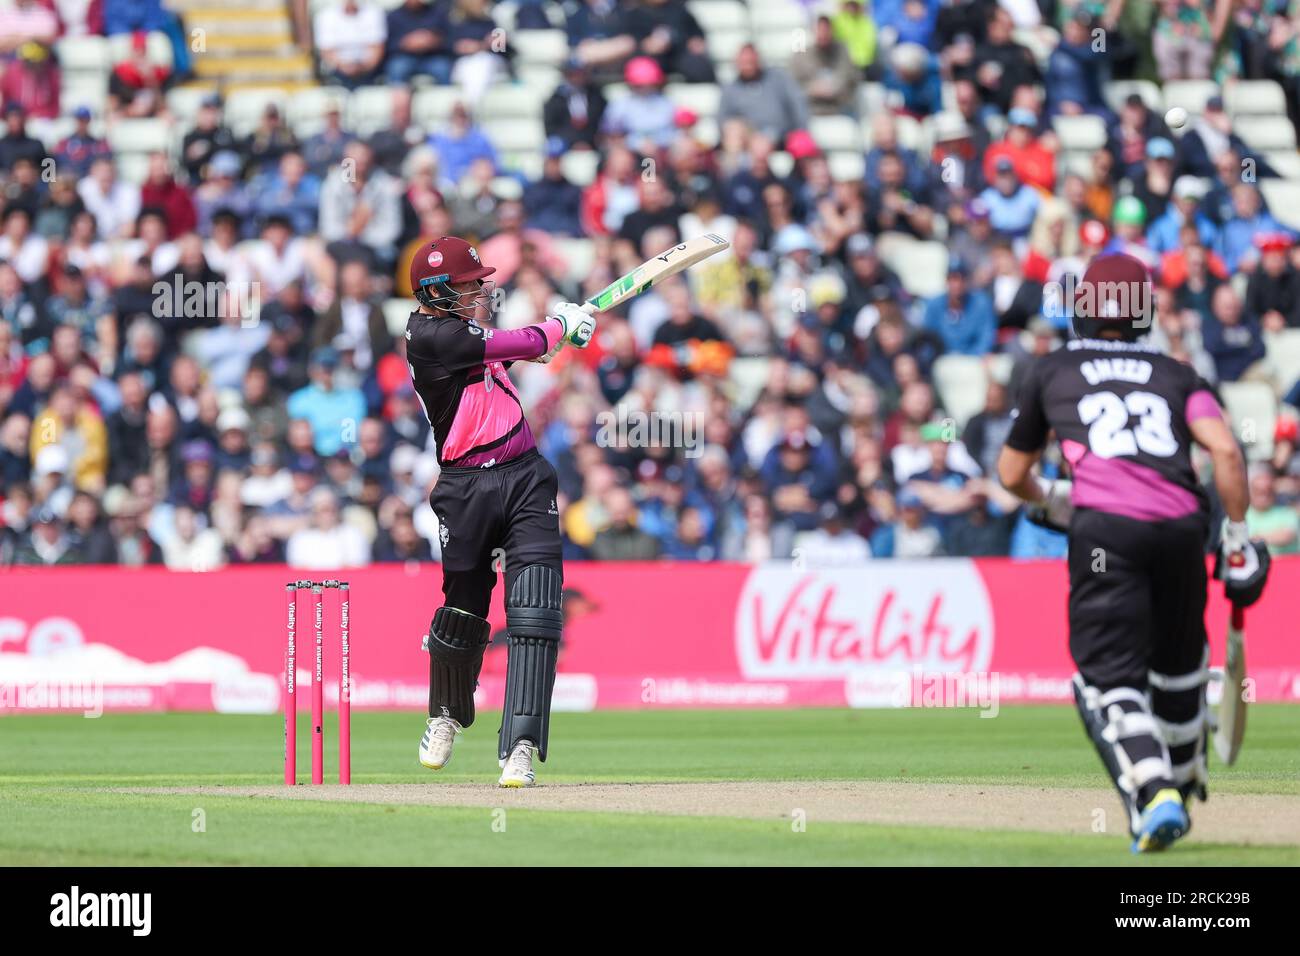 Birmingham, UK on 15 Jul 2023 at Warwickshire County Cricket Club, Edgbaston.  Pictured is Somerset’s wicketkeeper, Tom Banton in action during the 2023 Vitality Blast Semi Final between Somerset & Surrey  Image is for editorial use only - credit to Stu Leggett via Alamy Live News Stock Photo